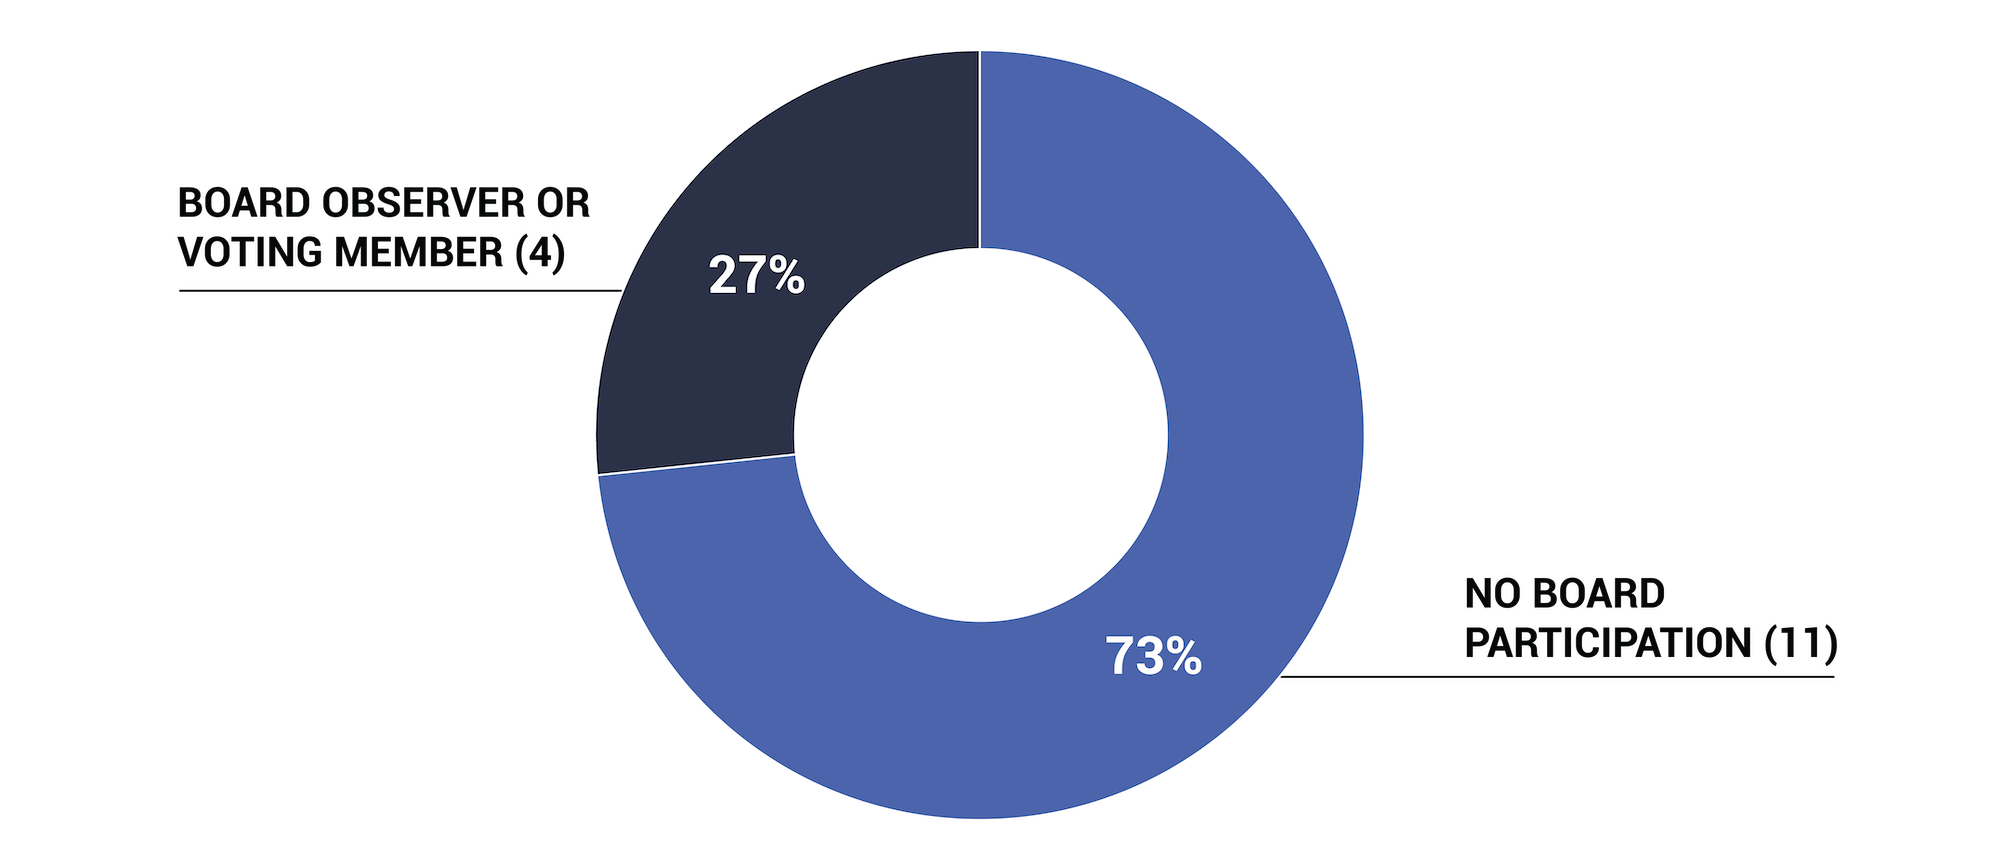 Figure 5 is a donut chart illustrating the degree of Luminate participation on the boards of interviewees.